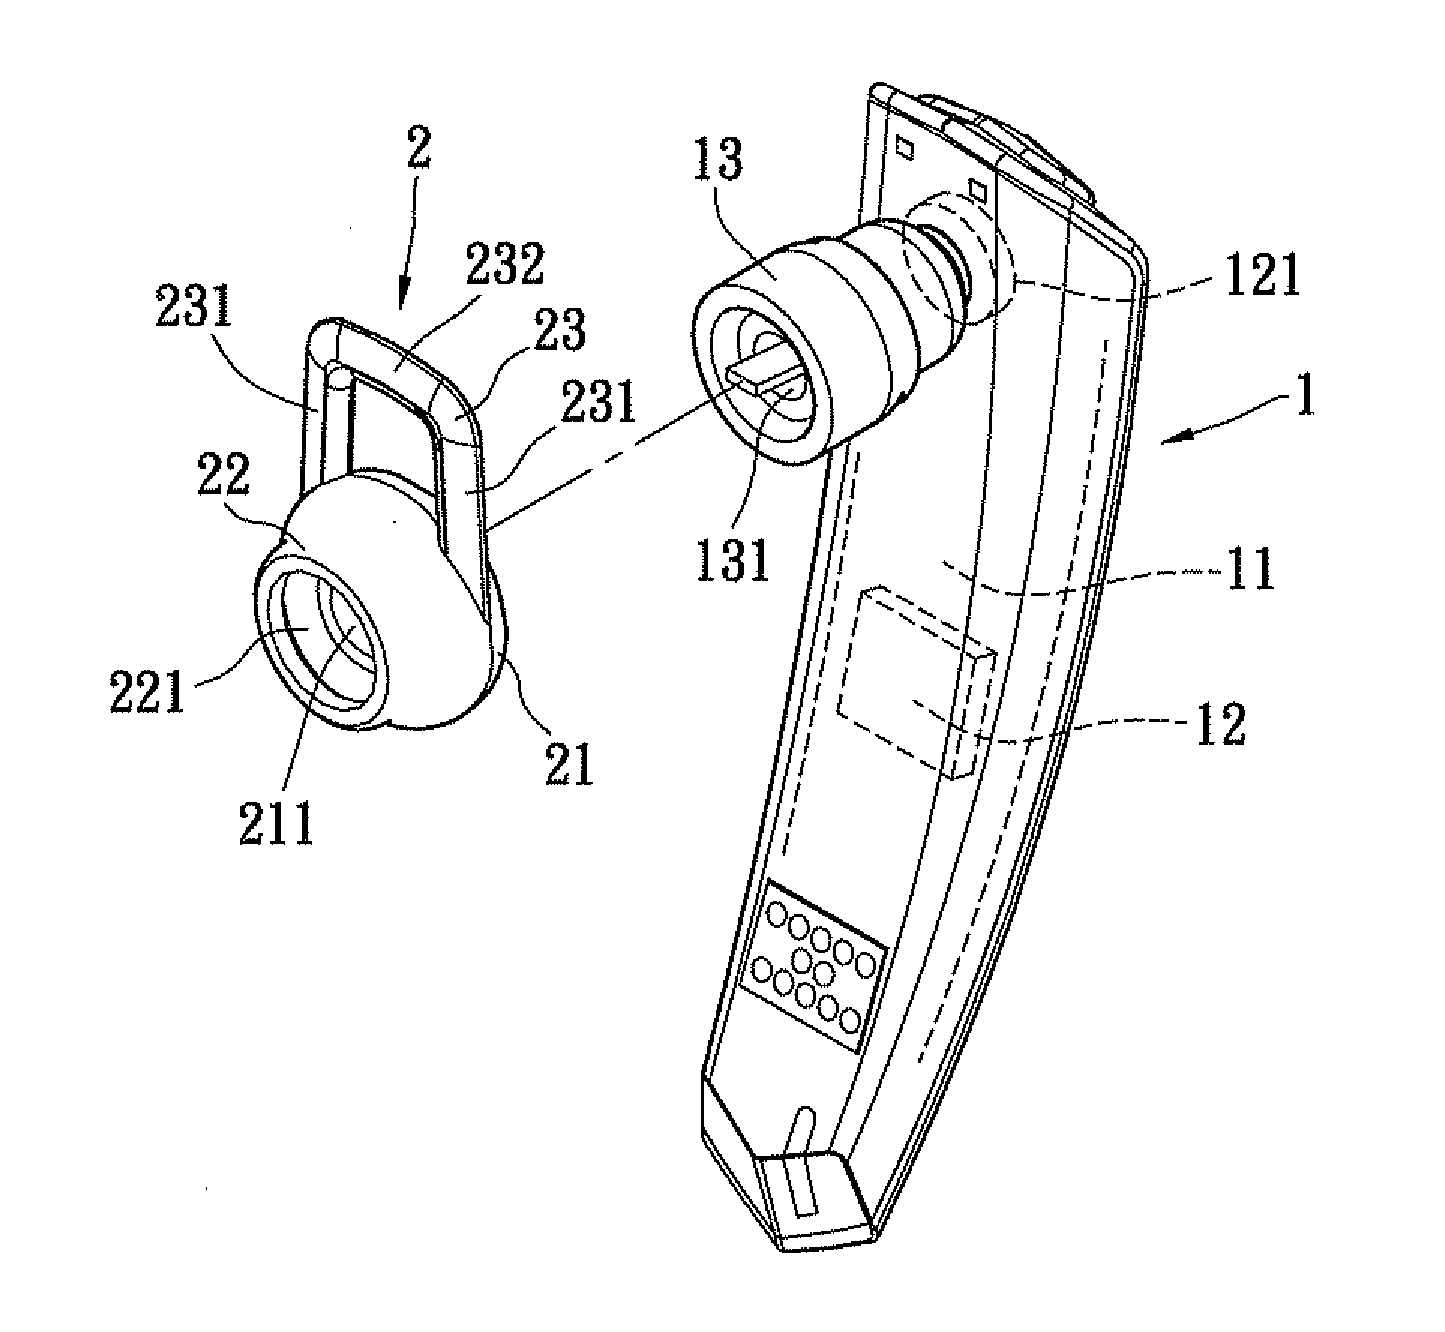 Earphone with a fixed function and earplug with a fixed function